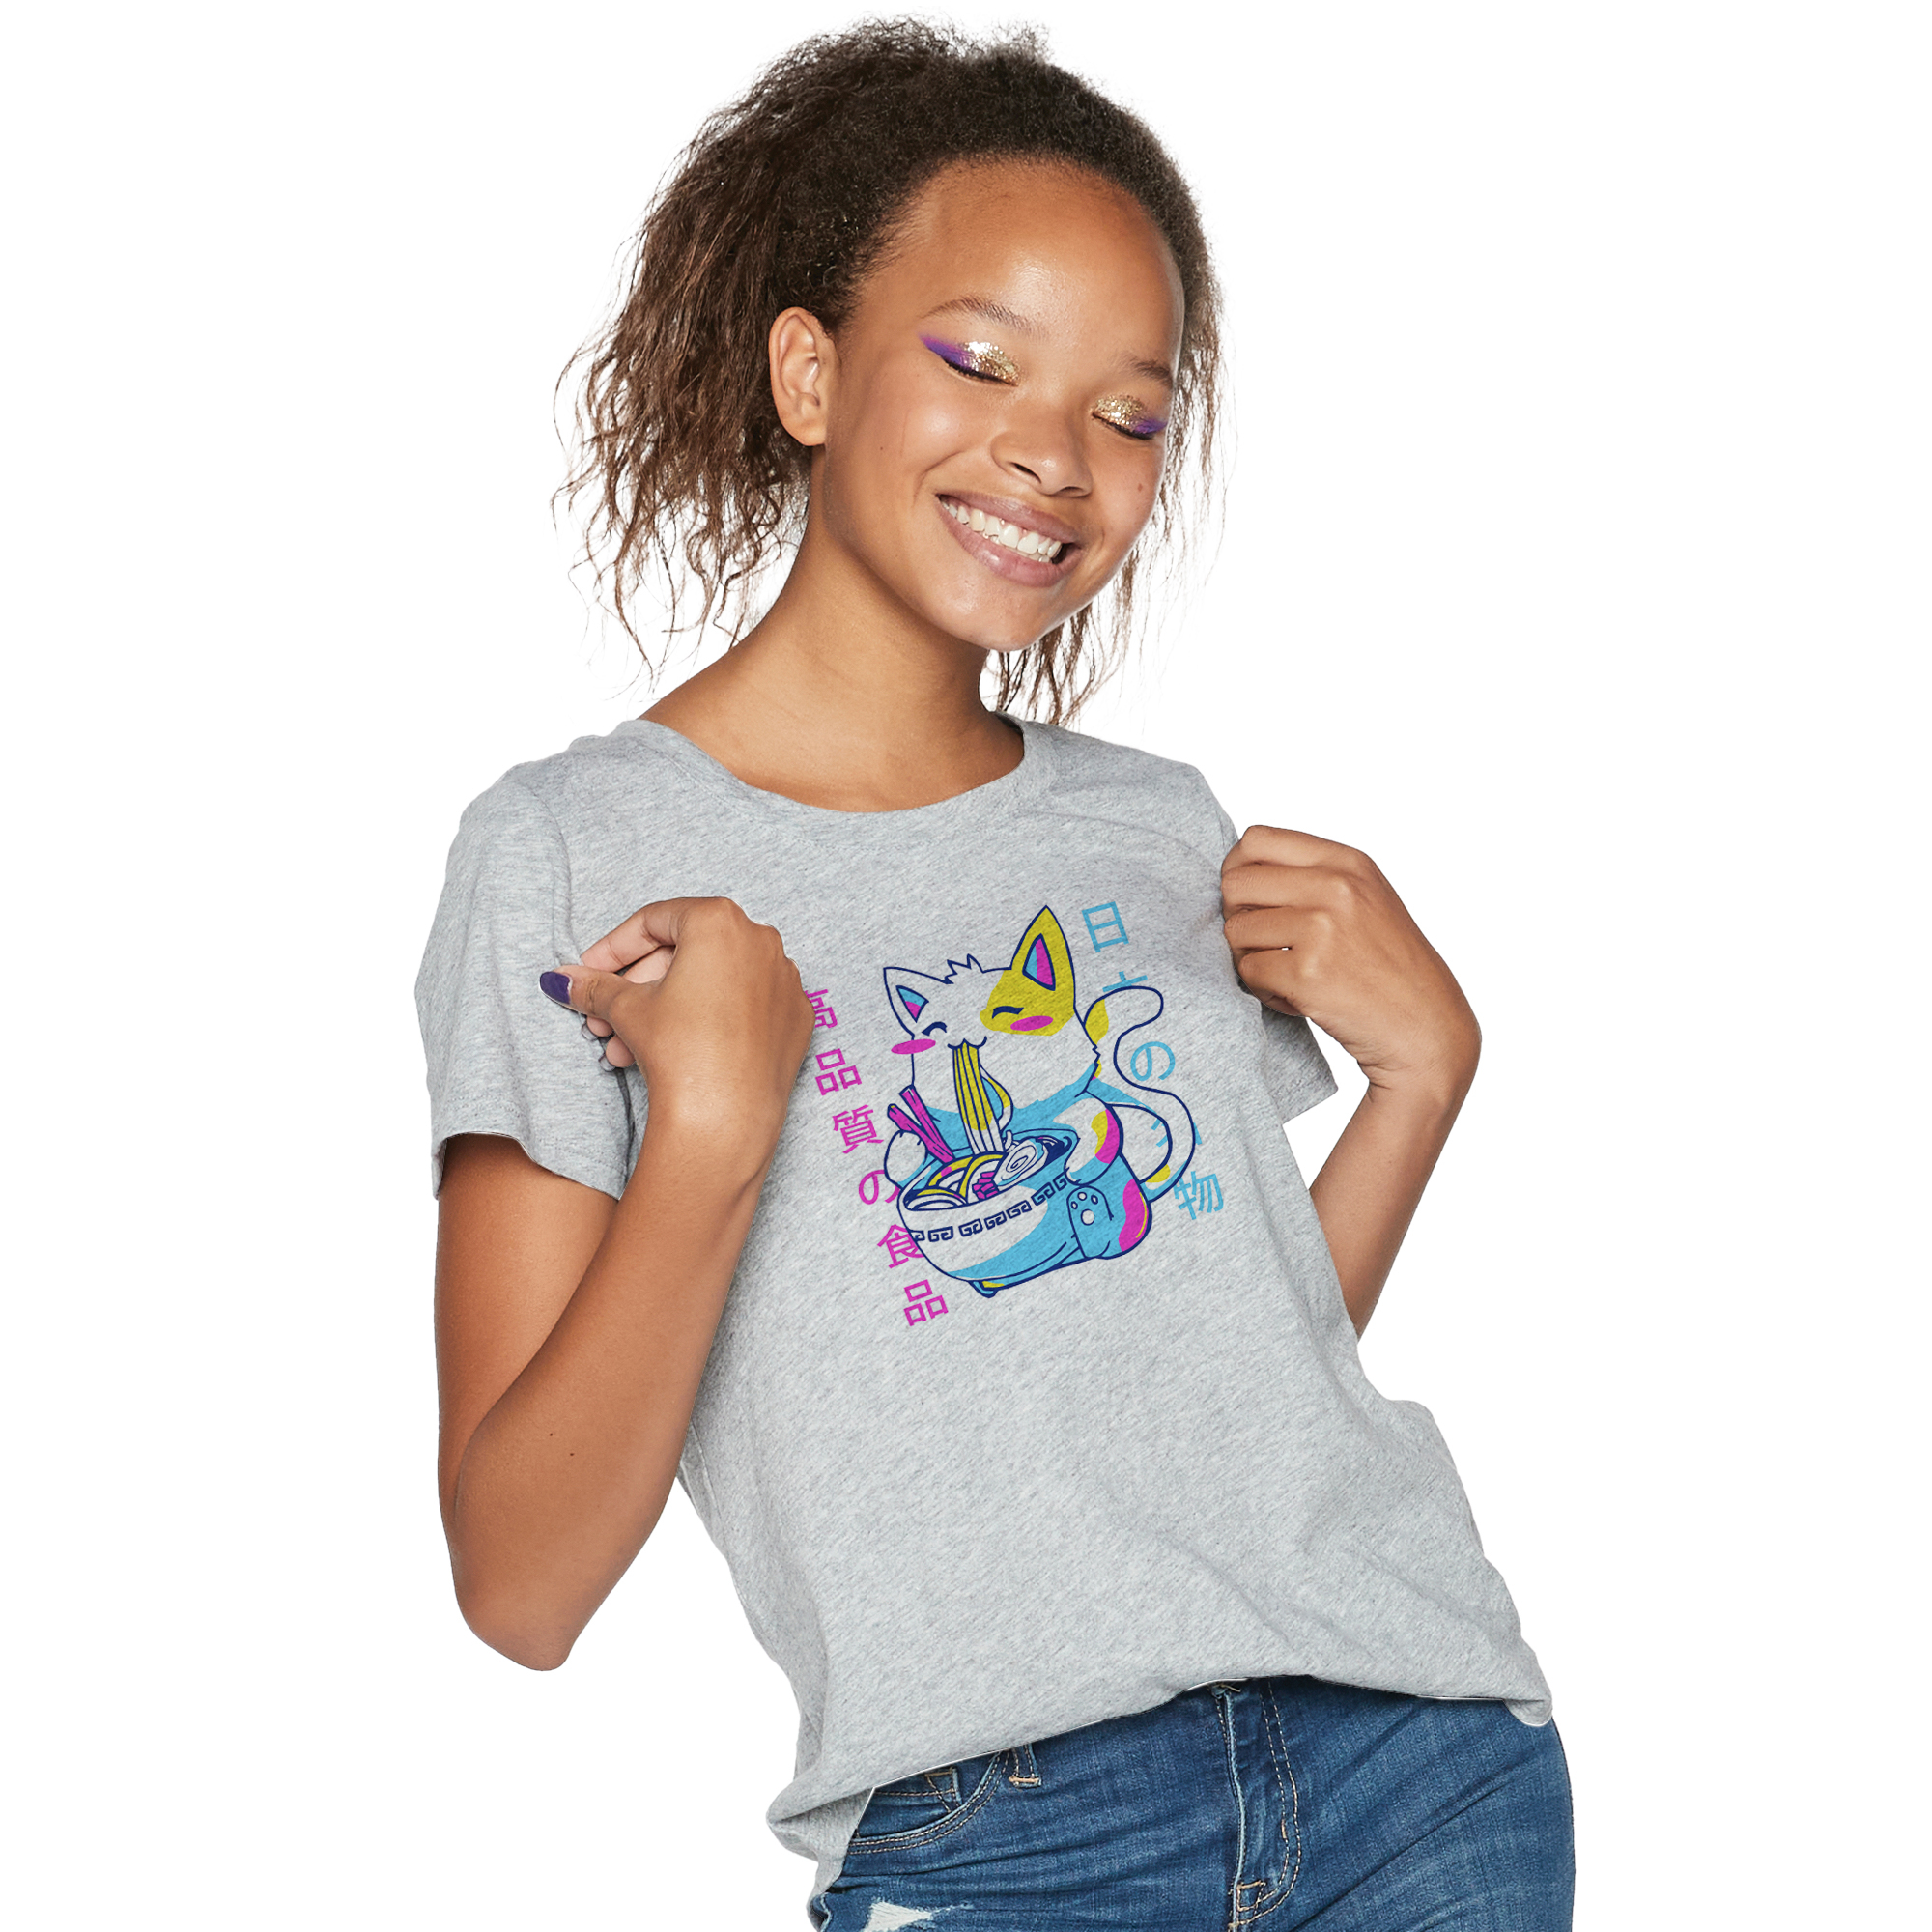 noodle cat graphic tee